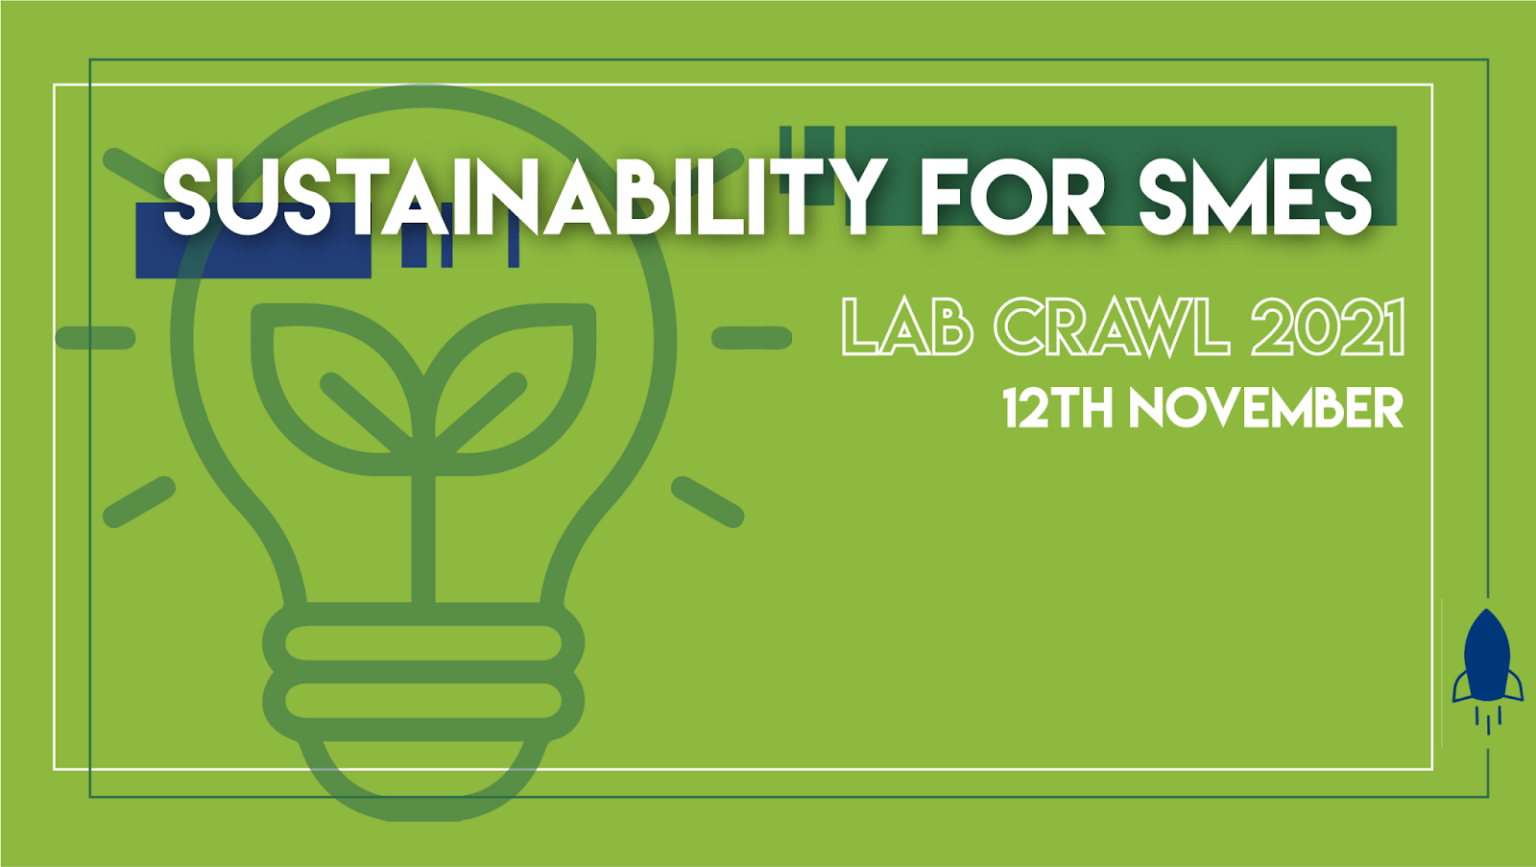 sustainability for smes 2021 - The FinLab's Lab Crawl 2021